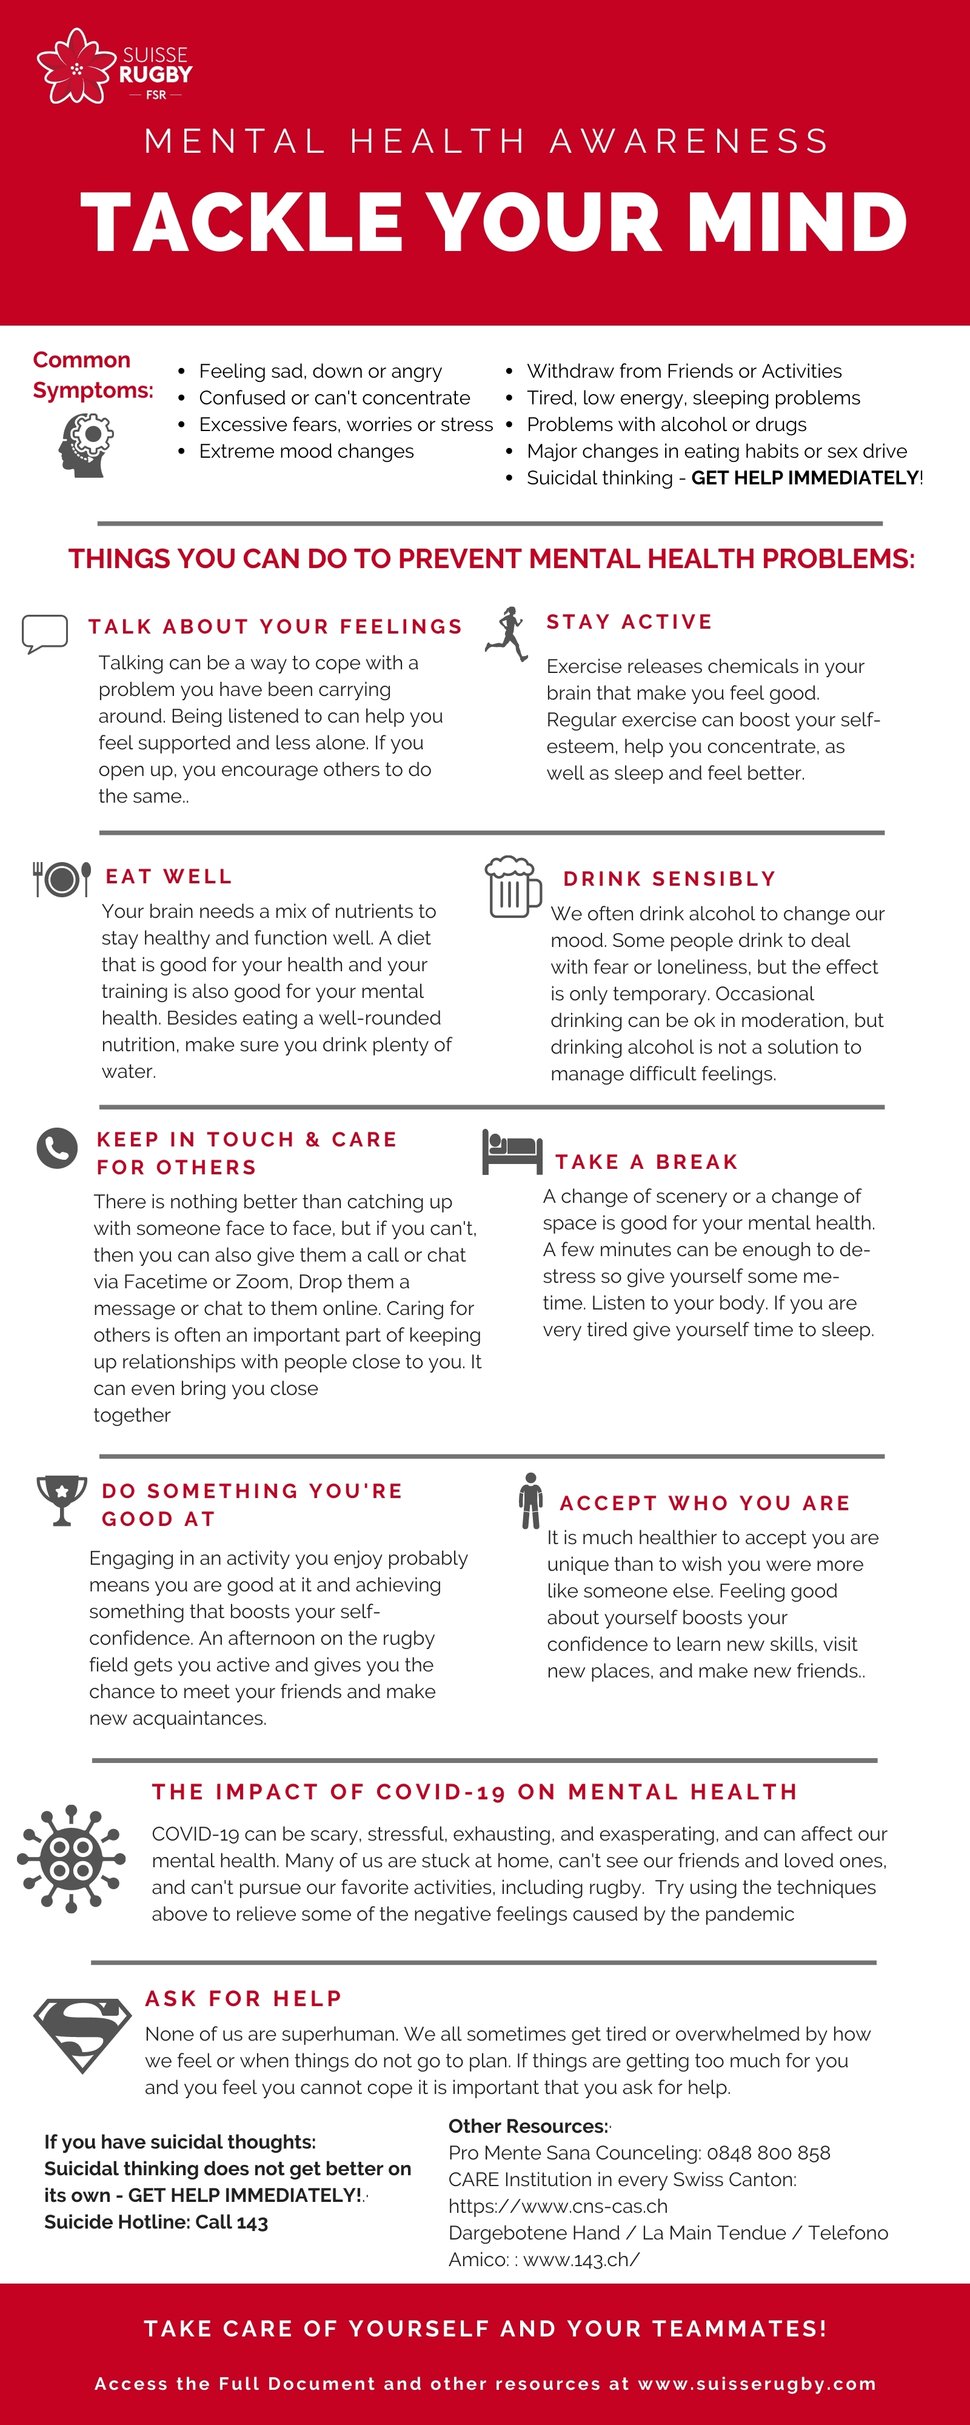 Tackle your mind Infographic